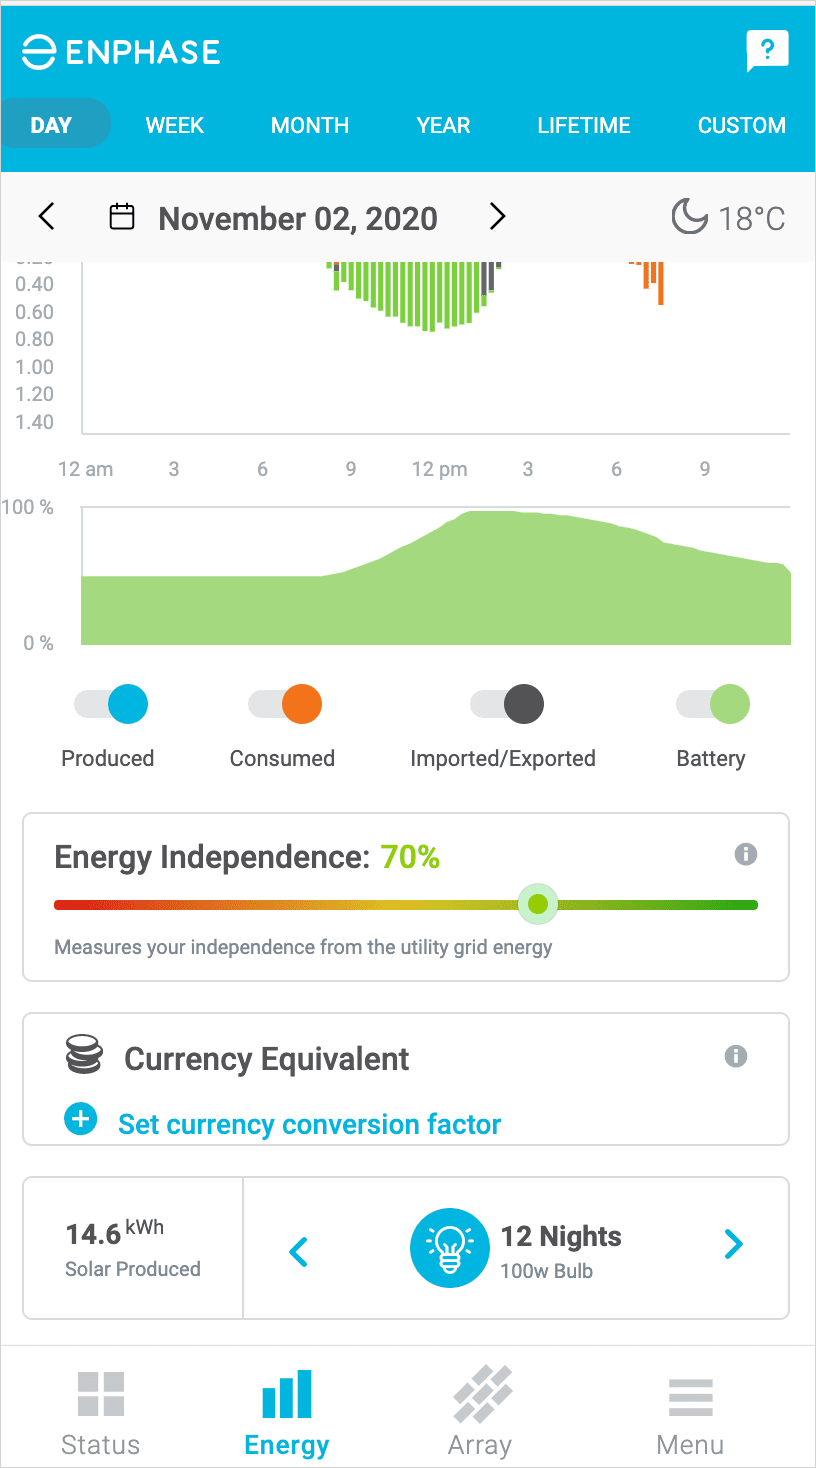  latest energy updates for your system